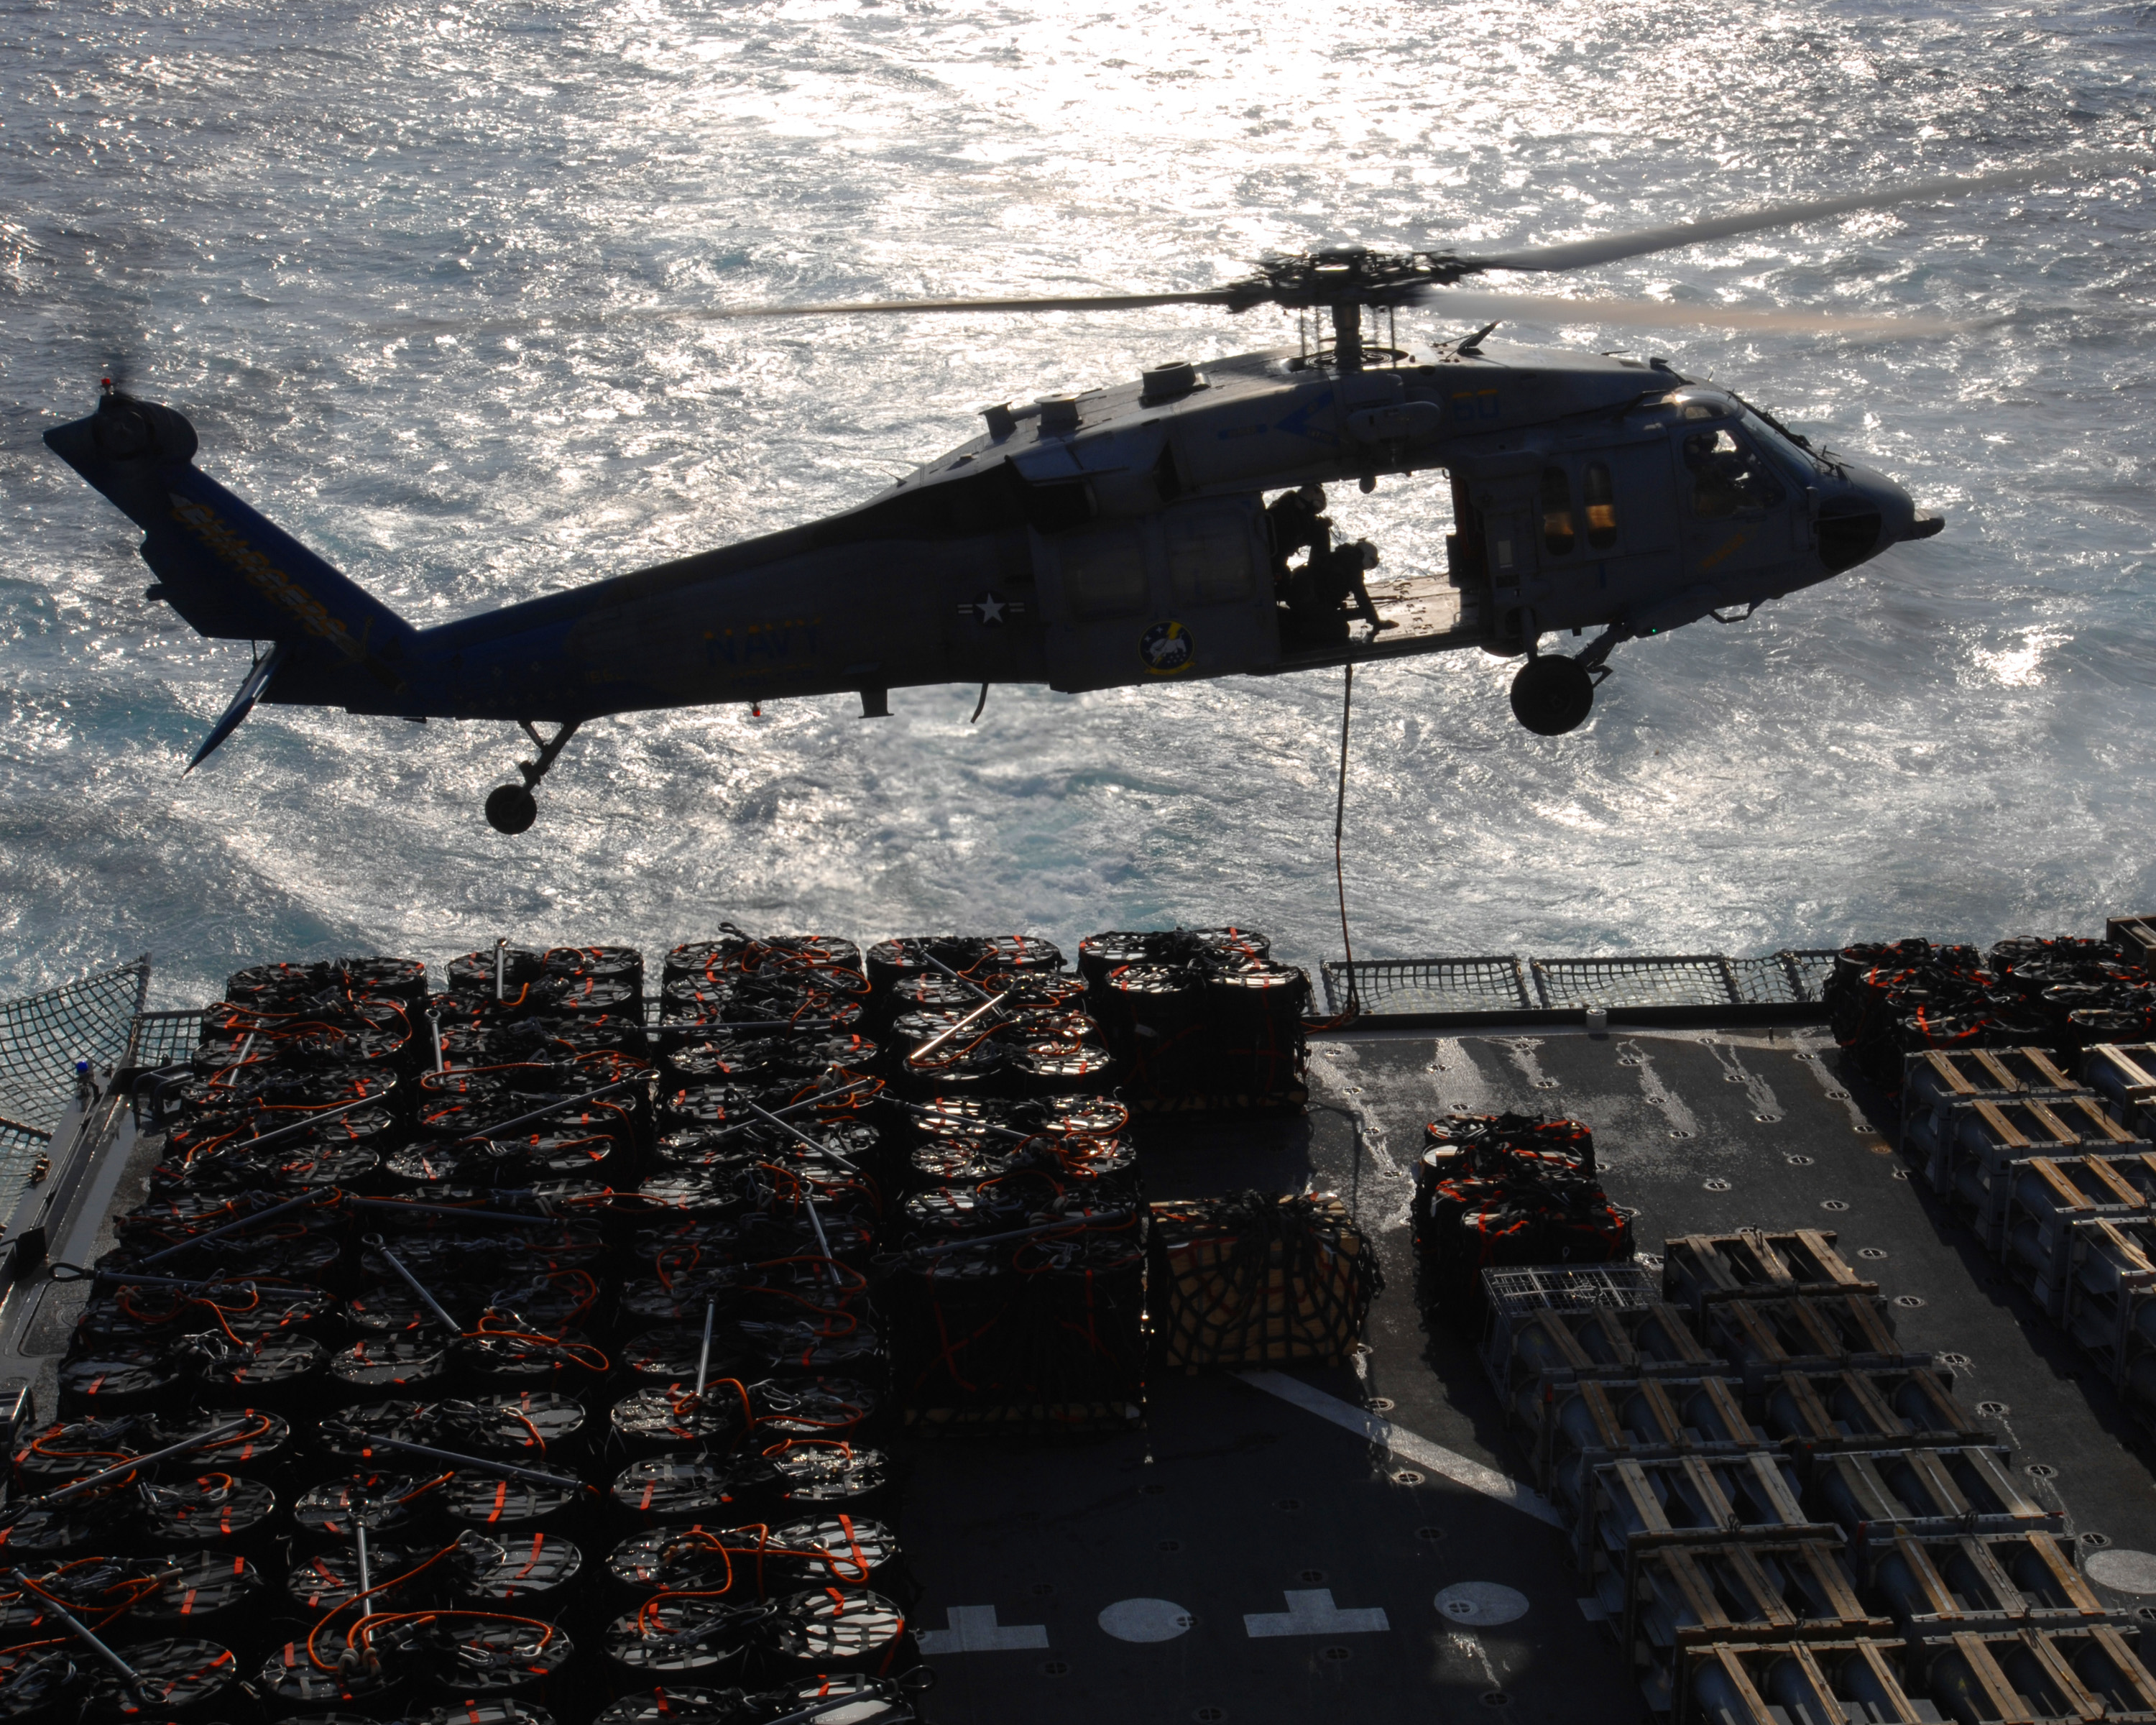 US Navy 061215-N-9708H-294 An MH-60S Seahawk helicopter assigned to Helicopter Sea Combat Squadron Two Six (HSC-26), station at Naval Station Norfolk, conducts a vertical replenishment